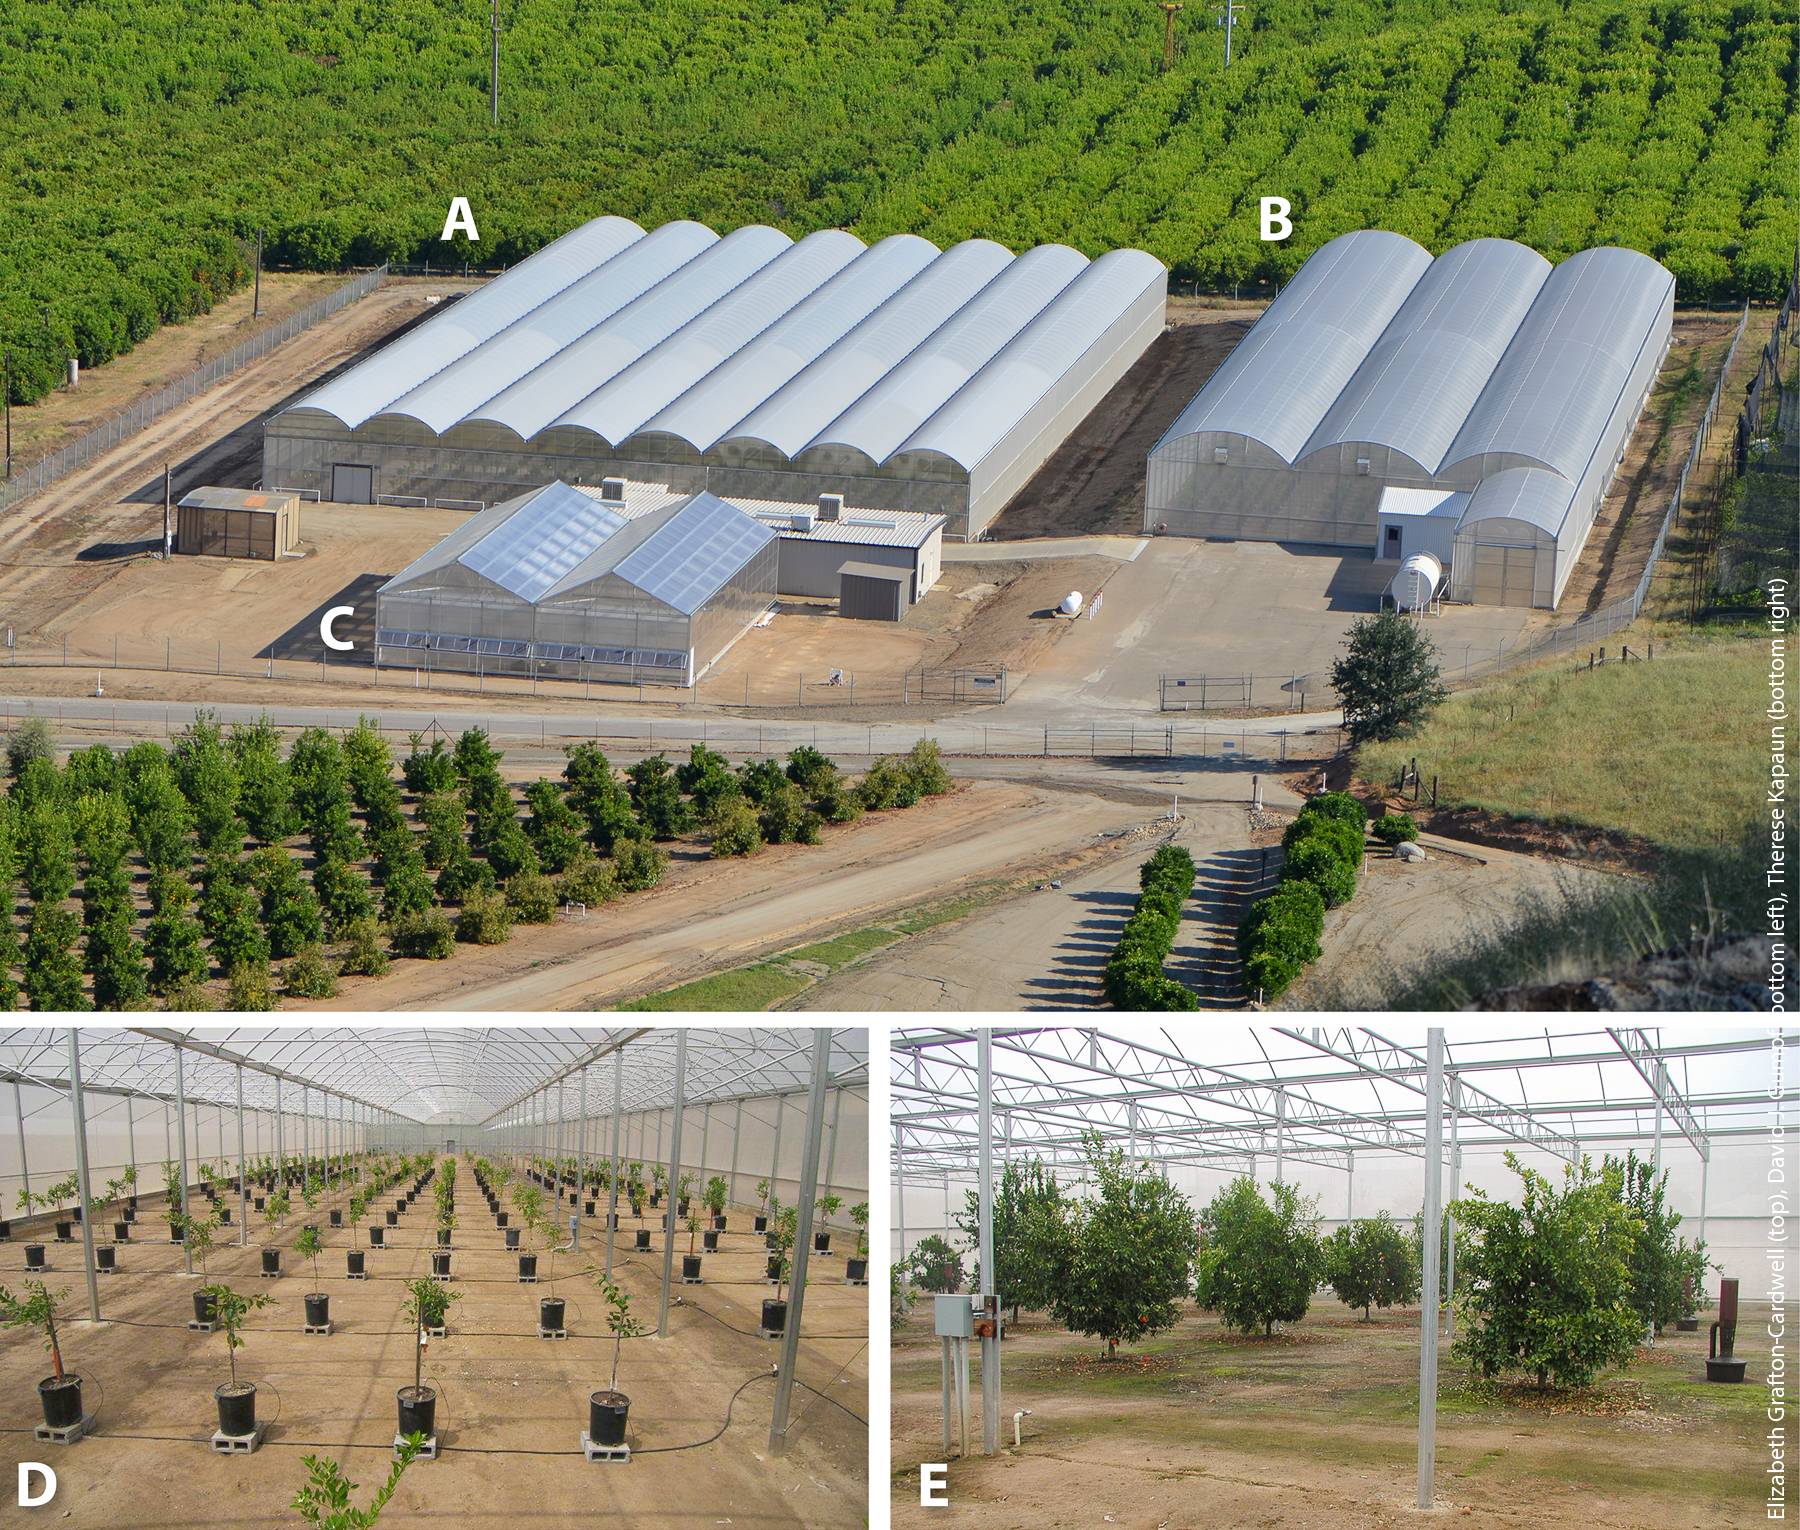 Panoramic view of the Citrus Clonal Protection Program Protected Foundation Block in the UC Lindcove Research and Extension Center in Tulare County. (A) The first screenhouse (40,000 sq ft) was constructed between 1998 and 1999, (B) the second screenhouse (30,000 sq ft) was completed in 2010 and (C) the positive pressure greenhouse (5,700 sq ft) was completed in 2011. The interior of the screenhouses with both (D) container and (E) in-ground budwood source trees.